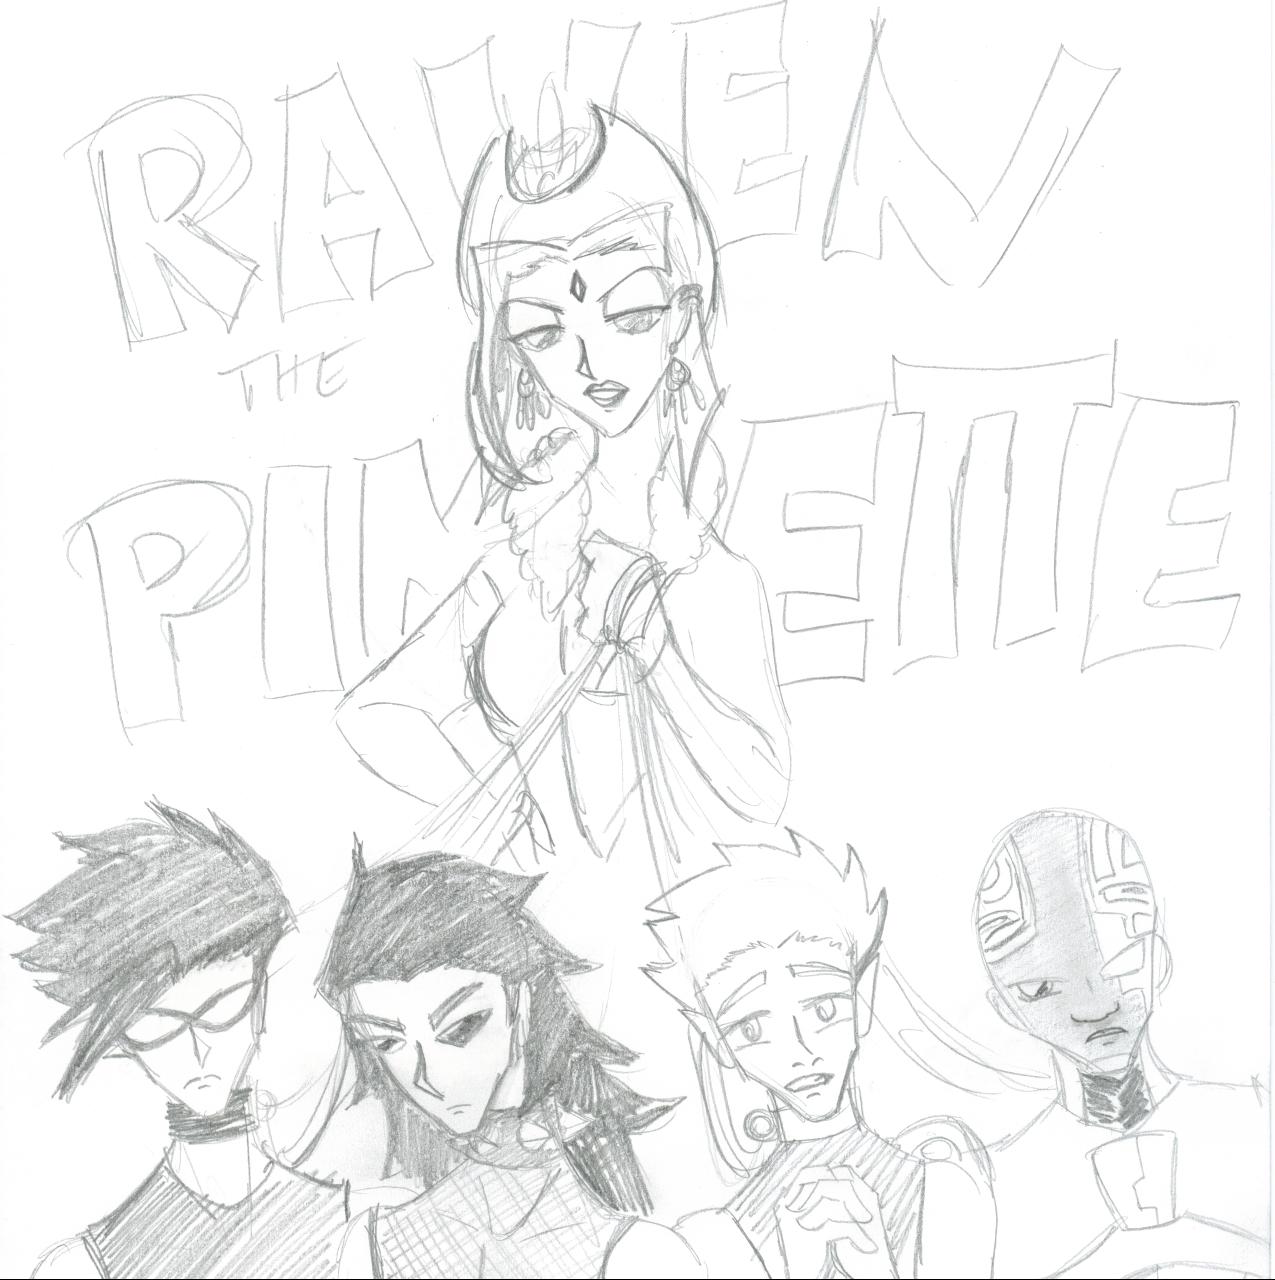 raven the pimpette by Purely_coincidental